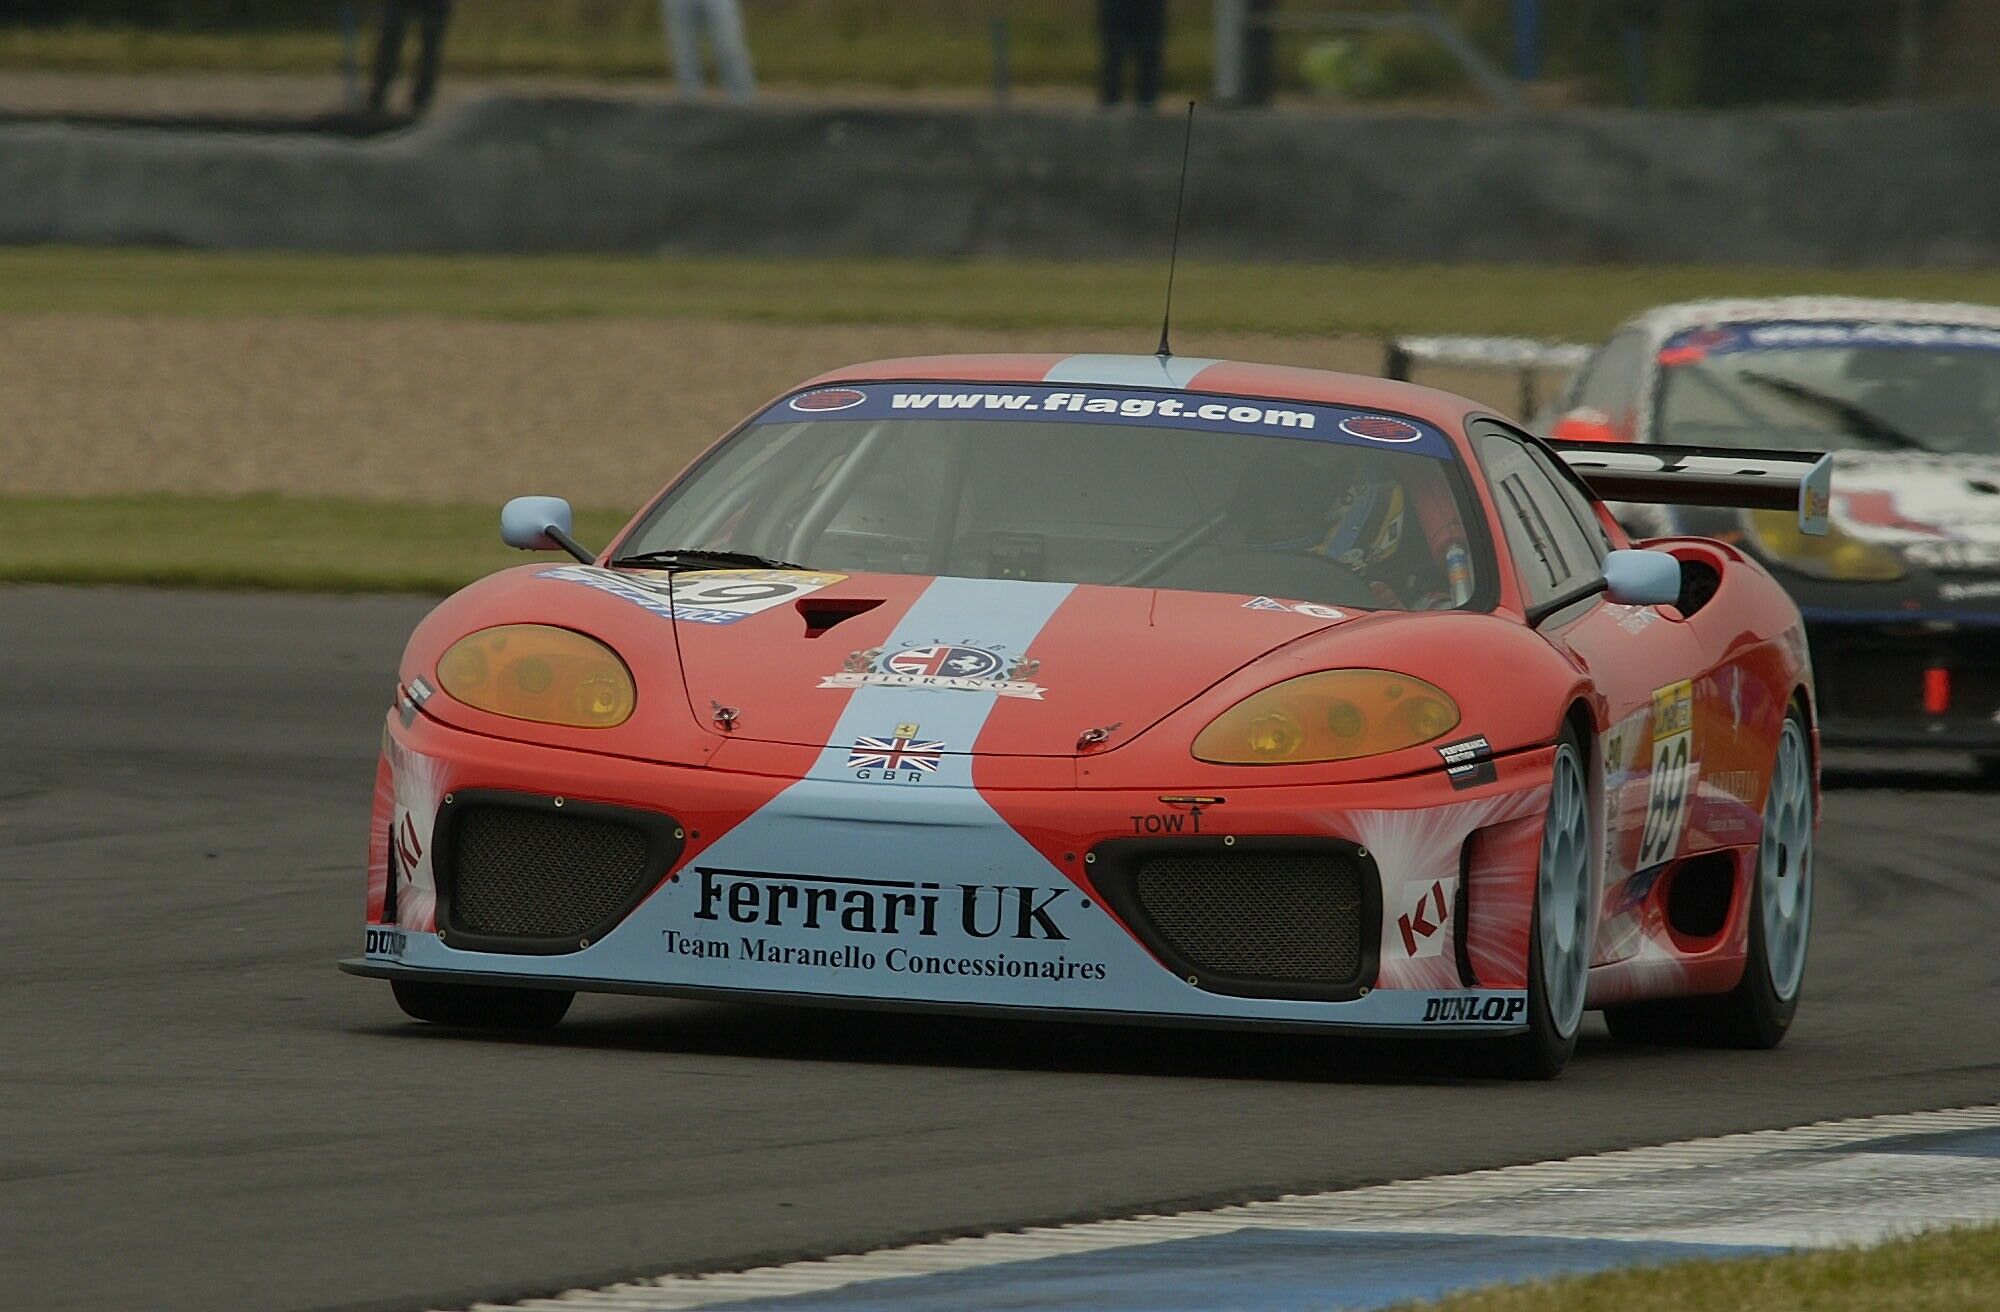 the no89 Team Maranello Concessionaires Ferrari 360 Modena on its way to N-GT pole during qualifying at Donington Park